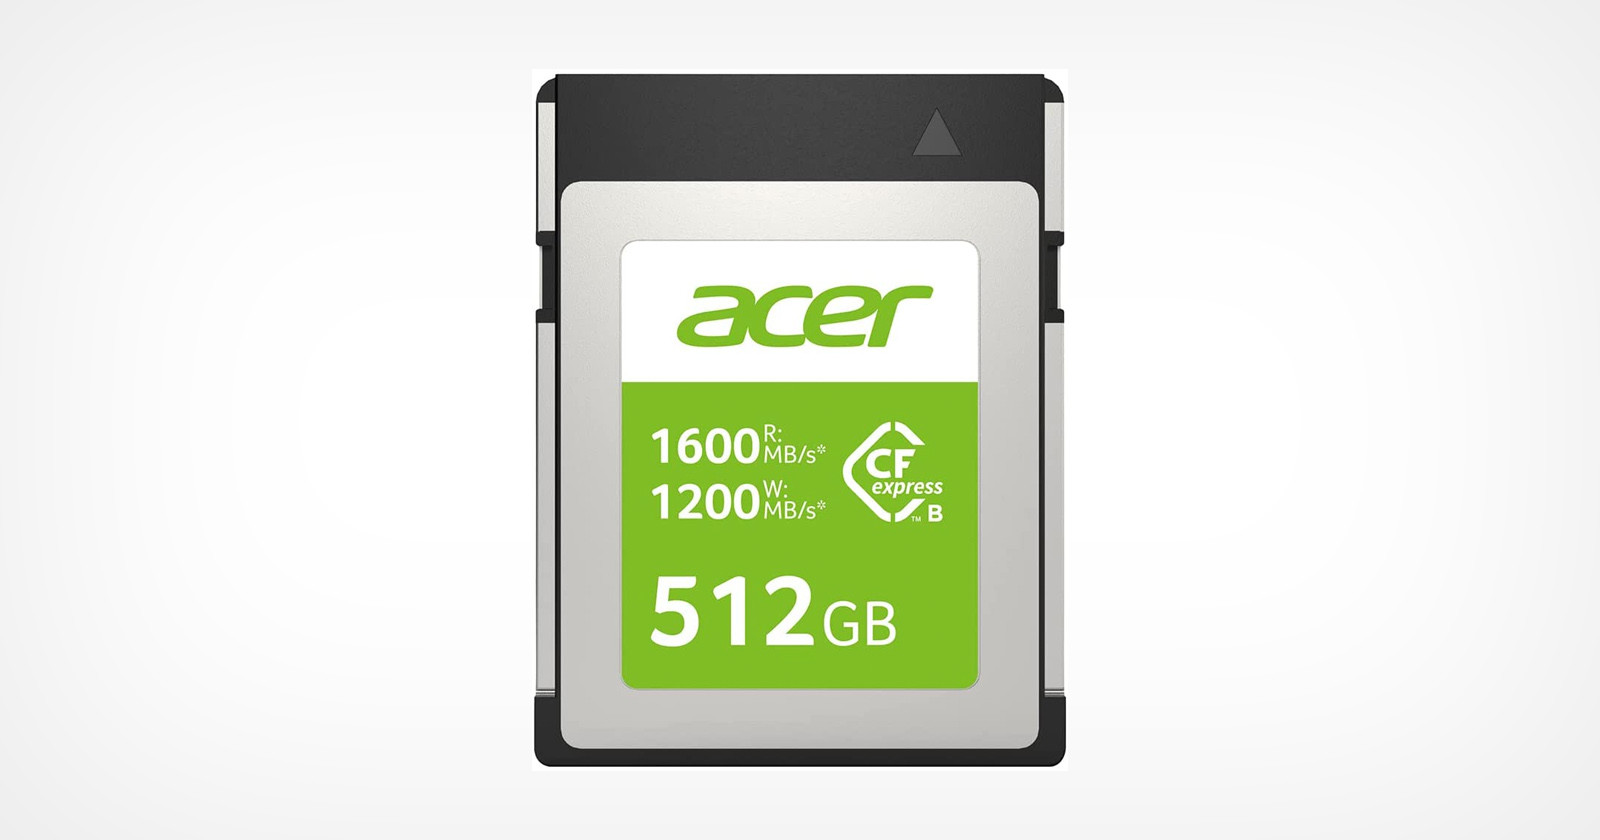 Acer Quietly Jumps into Photography, Launches CFexpress Memory Cards